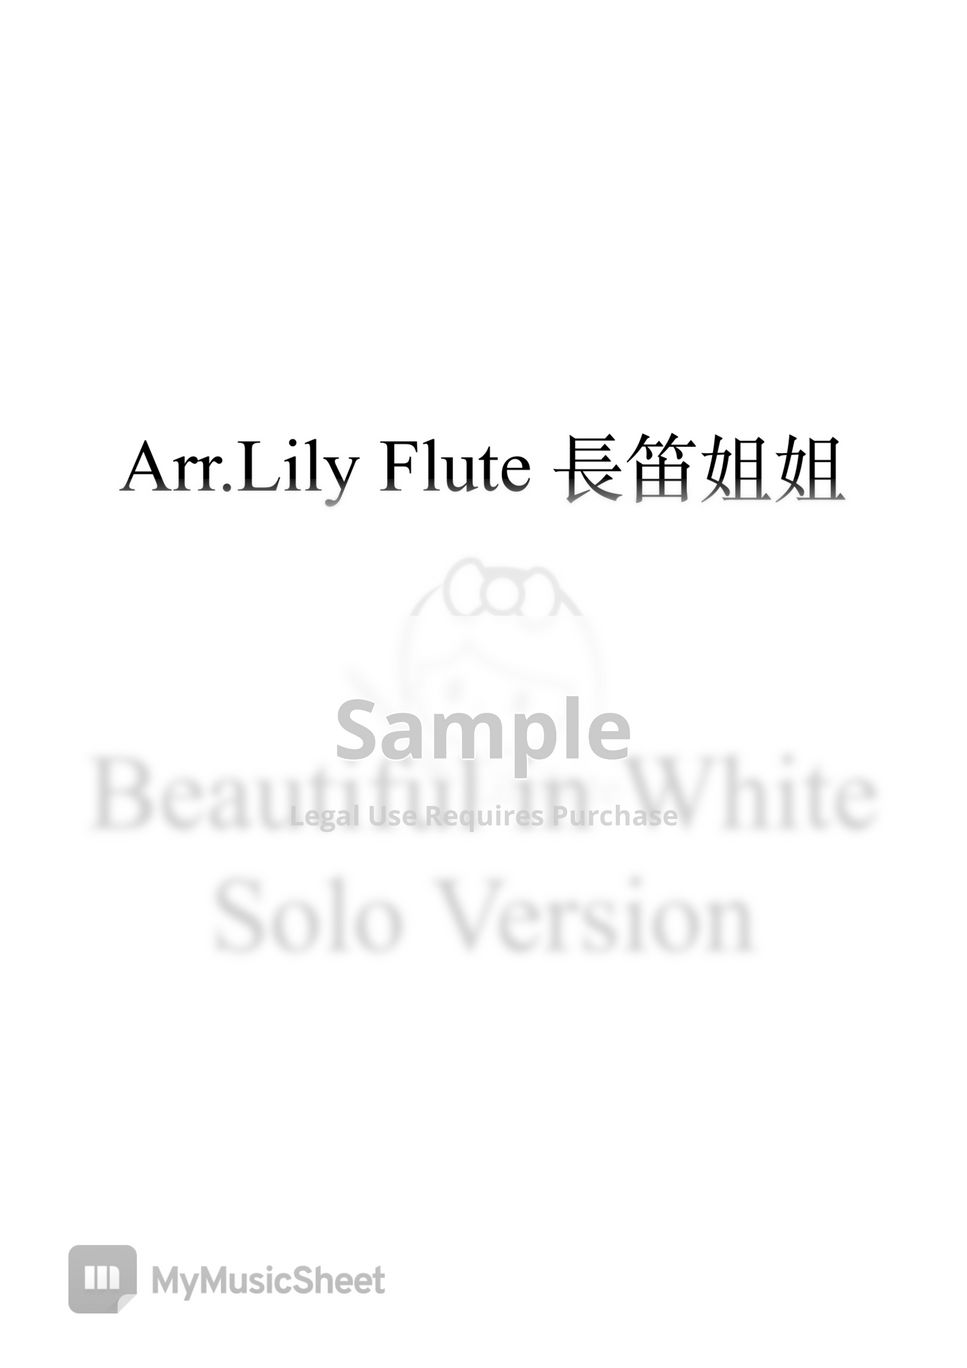 Westlife - Beautiful In White ＆ Canon  Solo version (YT附伴奏) by Lily Flute 長笛姐姐